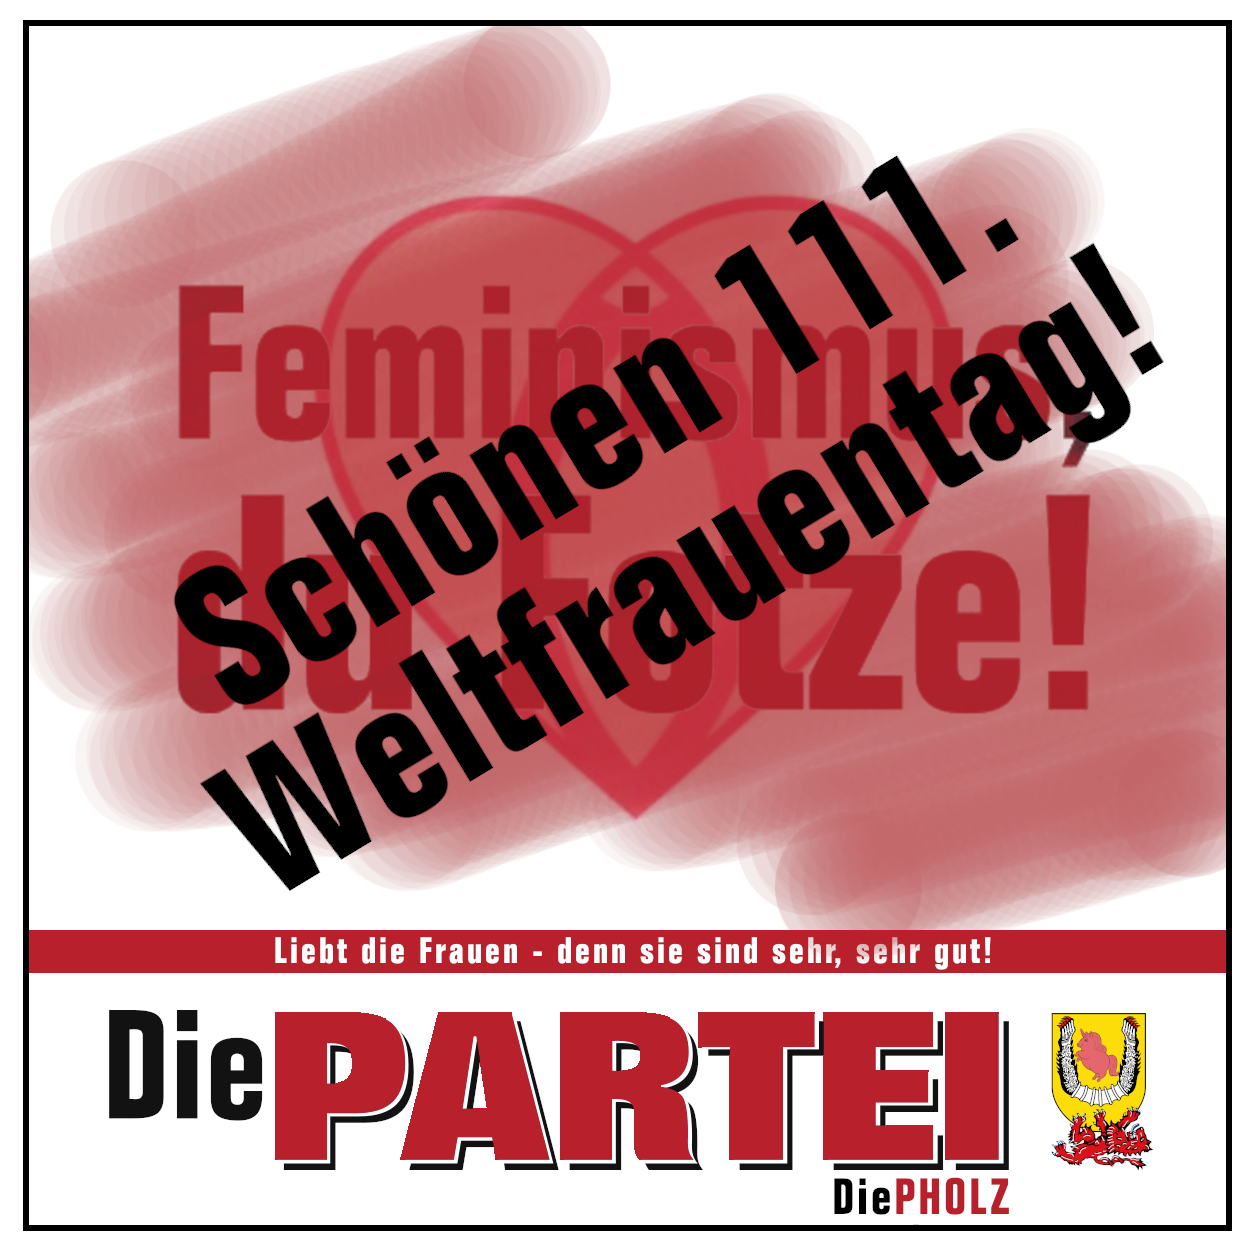 111. Weltfrauentag